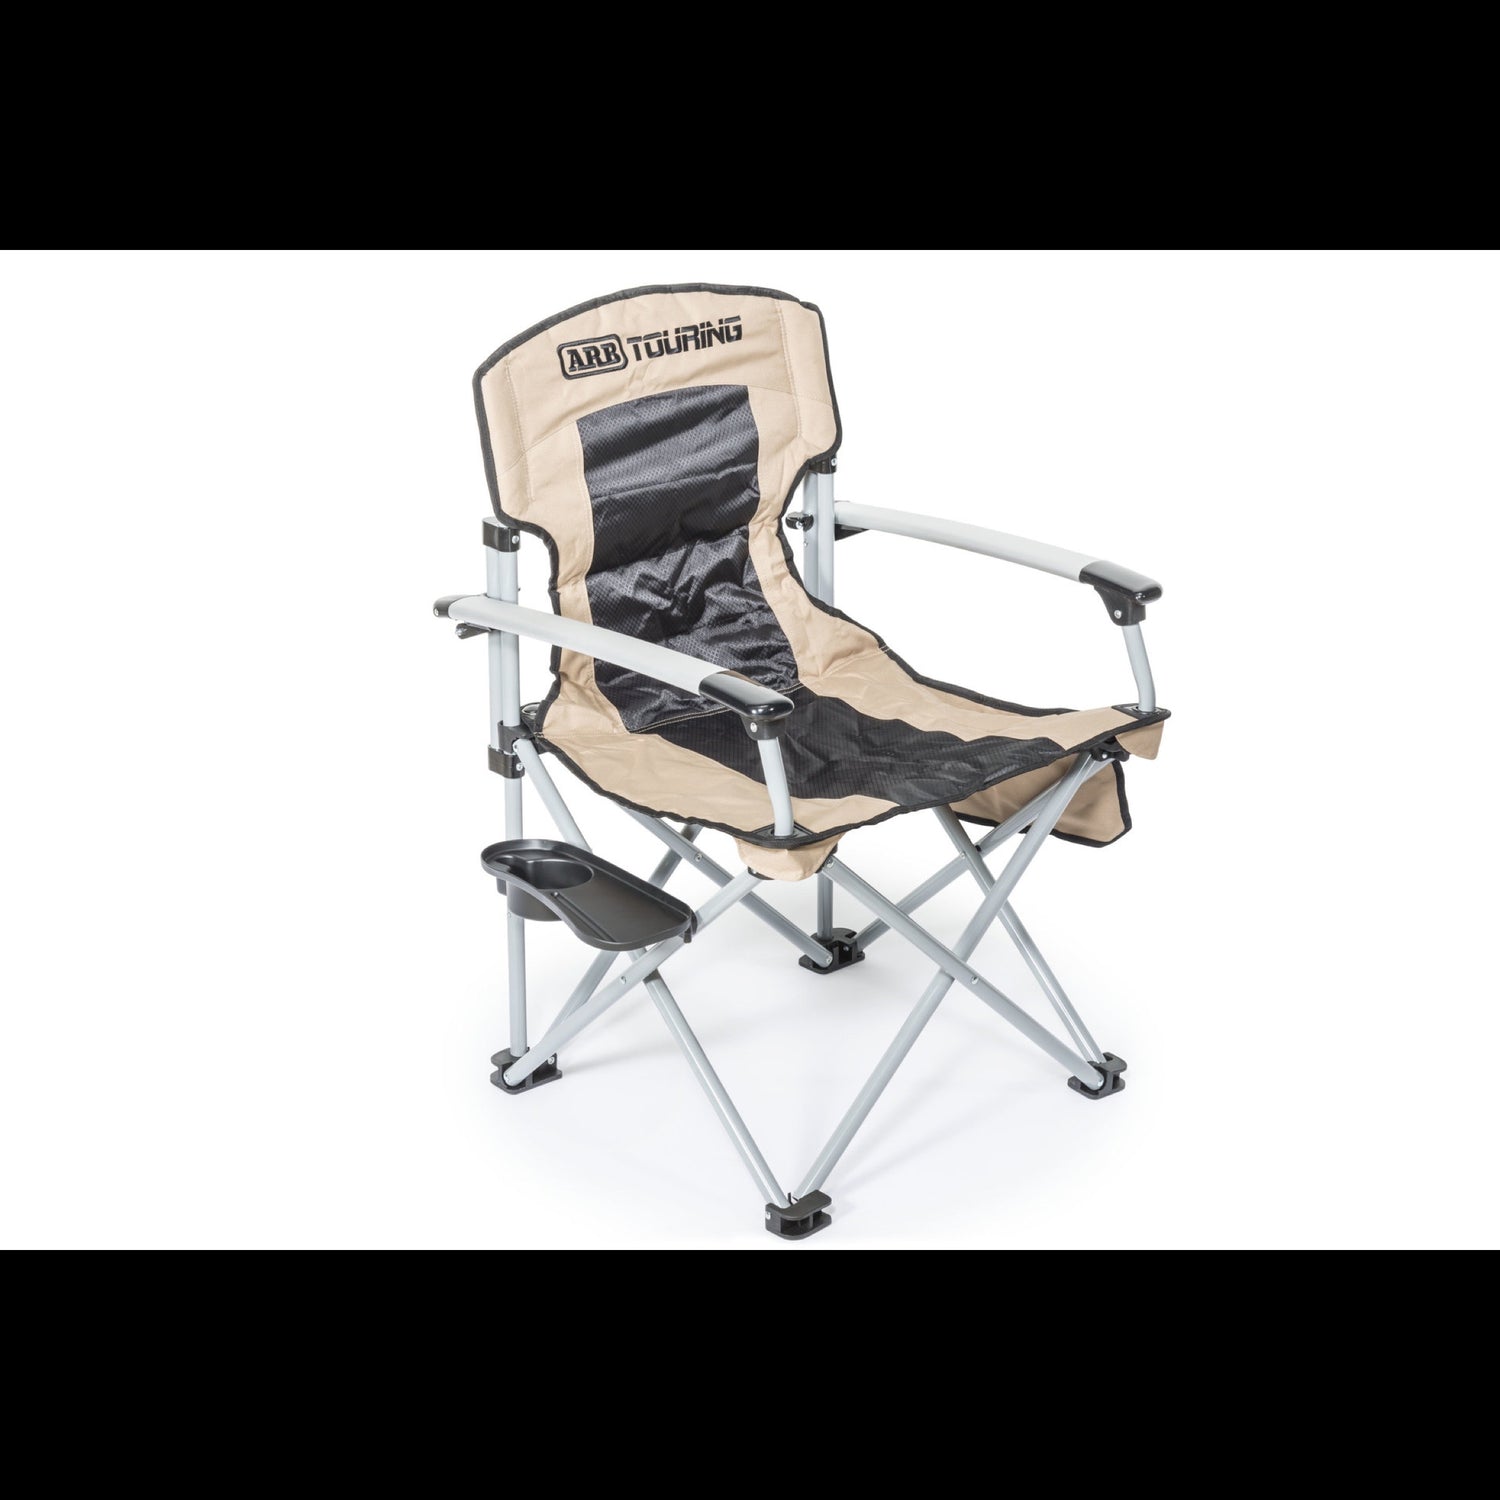 ARB Touring camping chair in tan